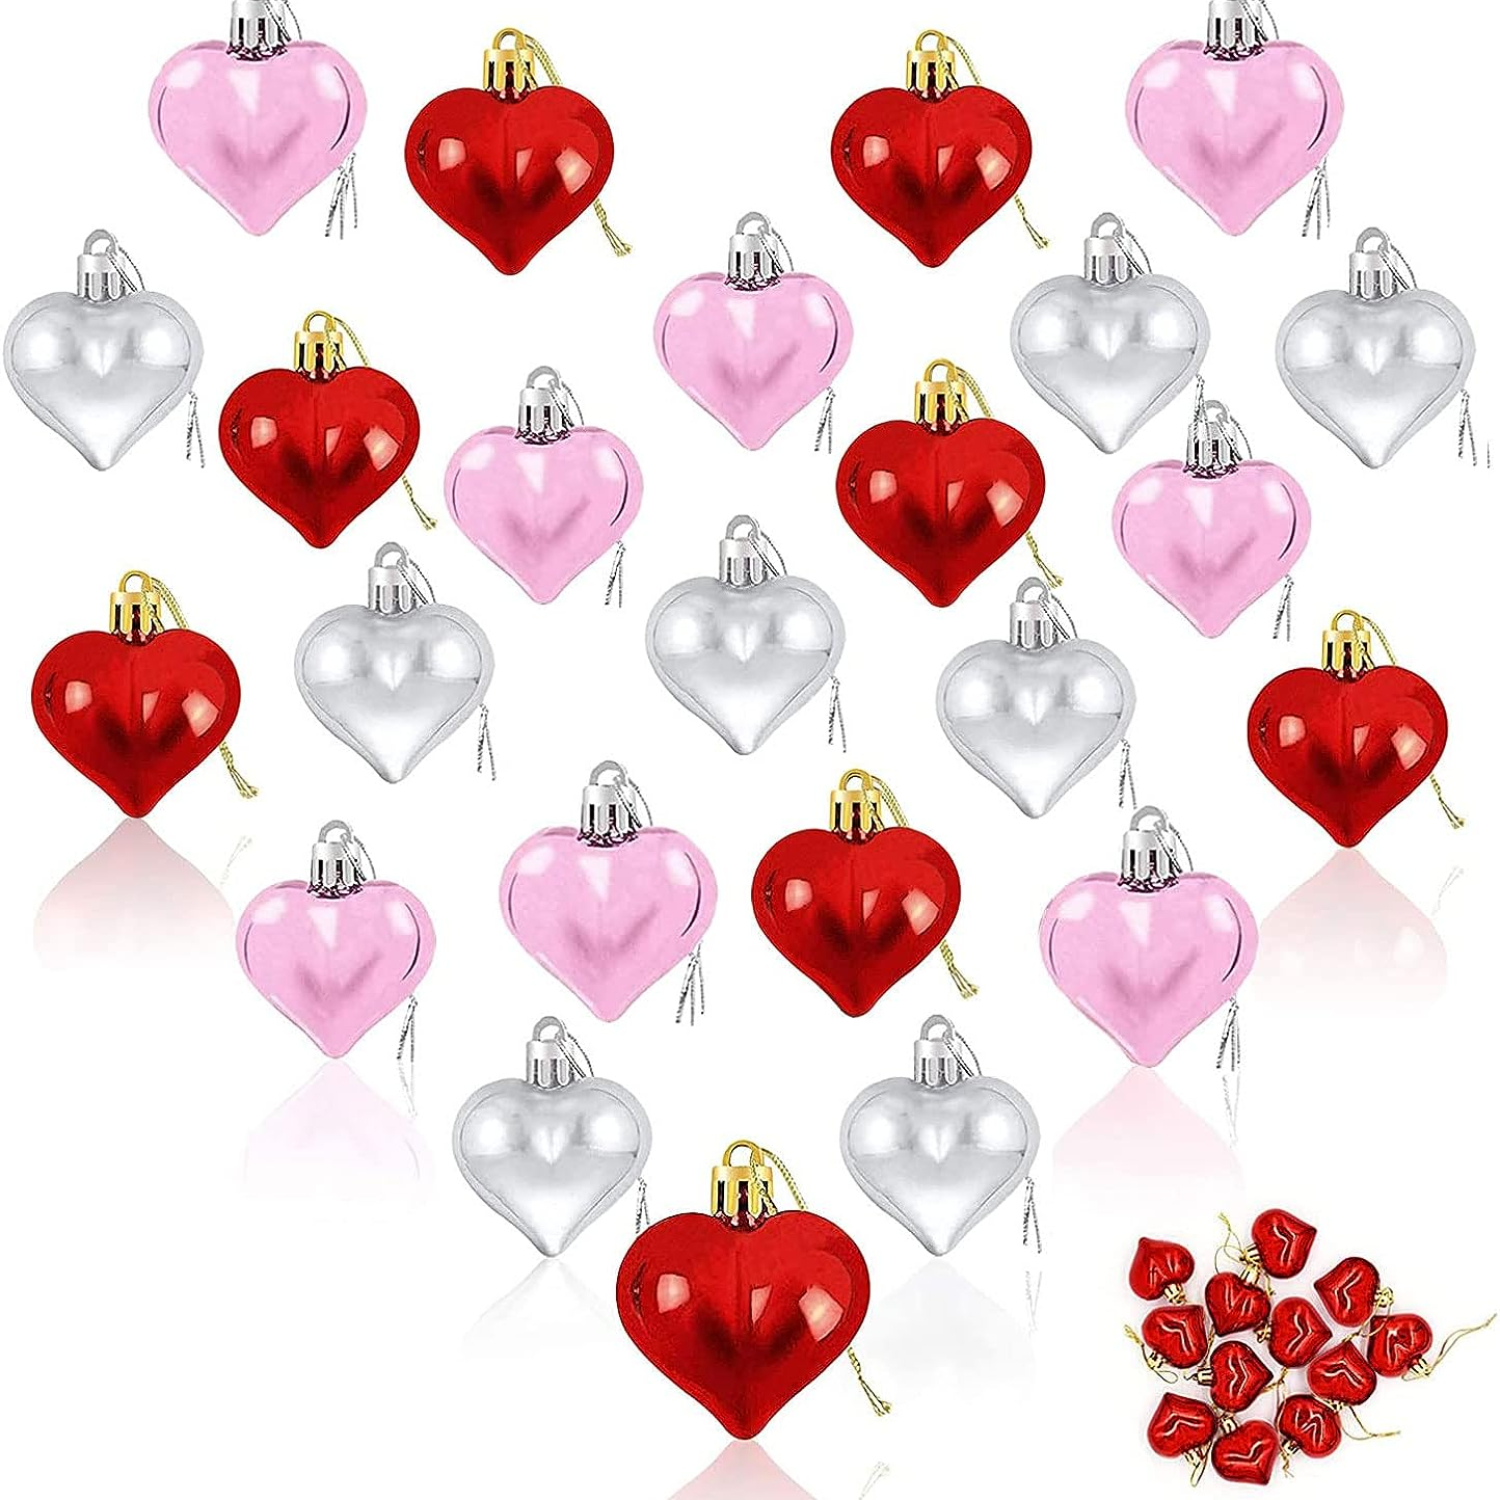 12pcs Valentine'S Day Heart Shaped Ornaments, Valentines Heart Decorations,  Red Glitter Heart Shaped Baubles, Romantic Valentine'S Day Tree Hanging